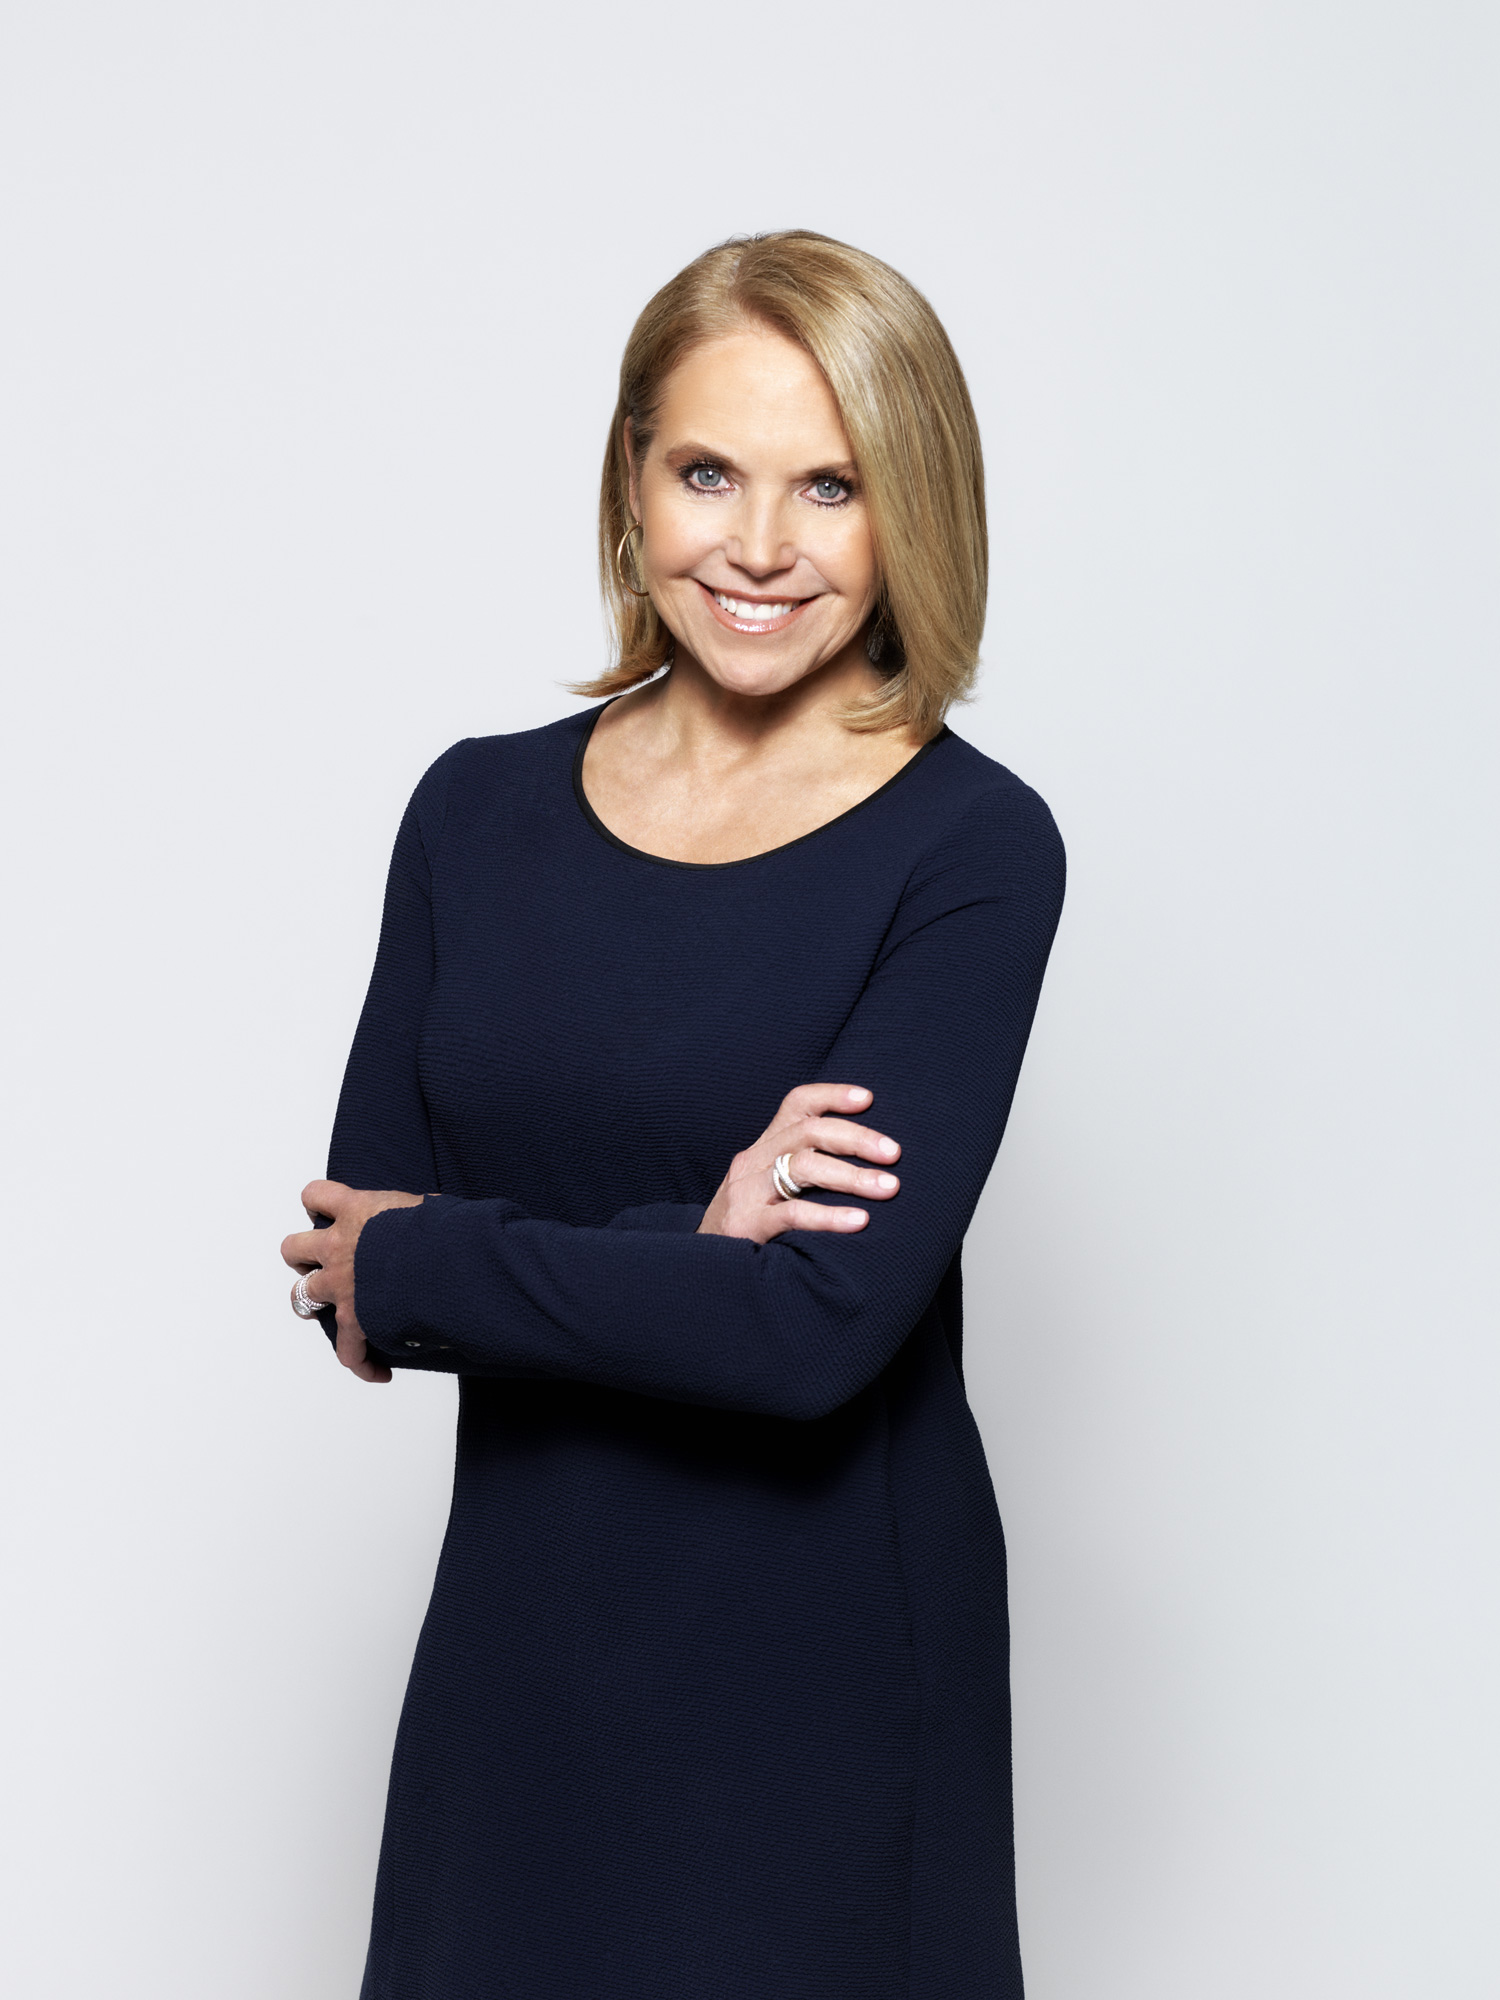 Katie Couric teams up with Jane Walker by Johnnie Walker for First Women campaign celebrating and inspiring women breaking boundaries.